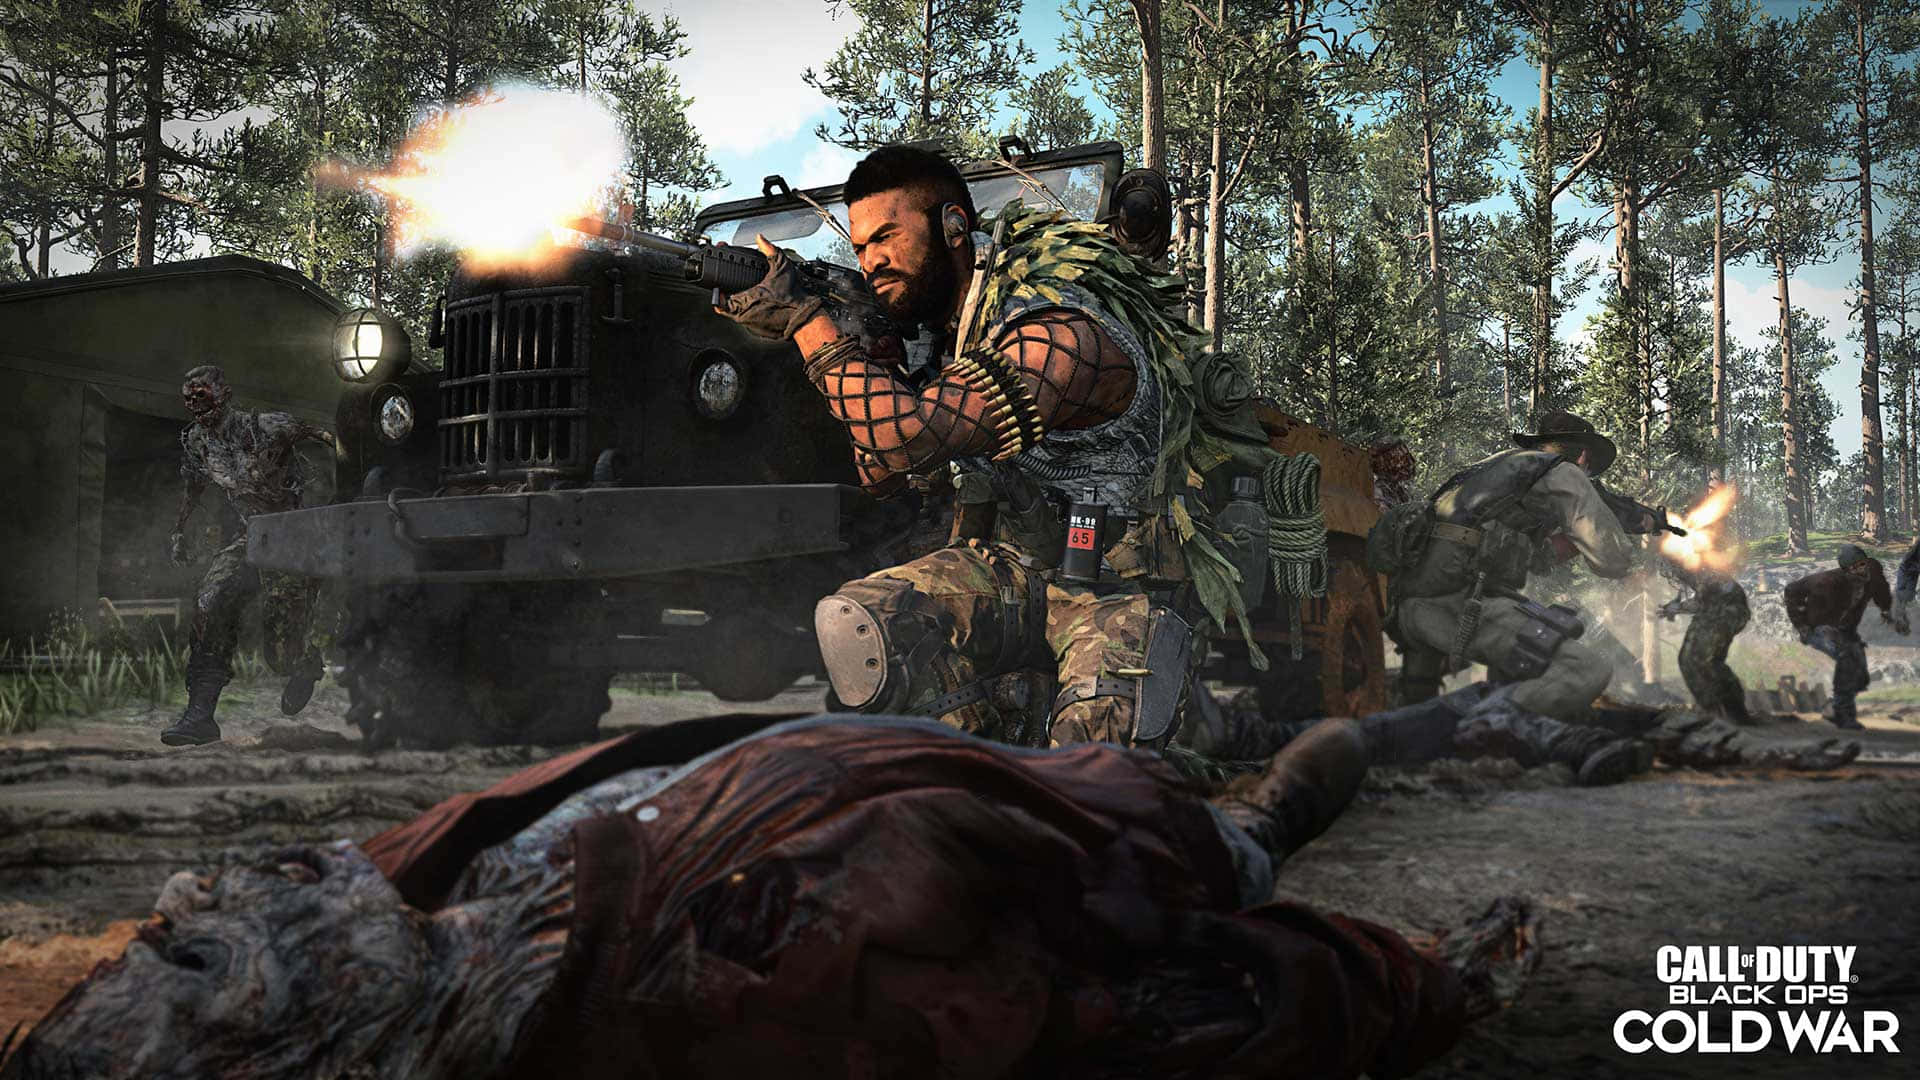 Strap in and experience the thrilling intensity of Call Of Duty: Black Ops Cold War.